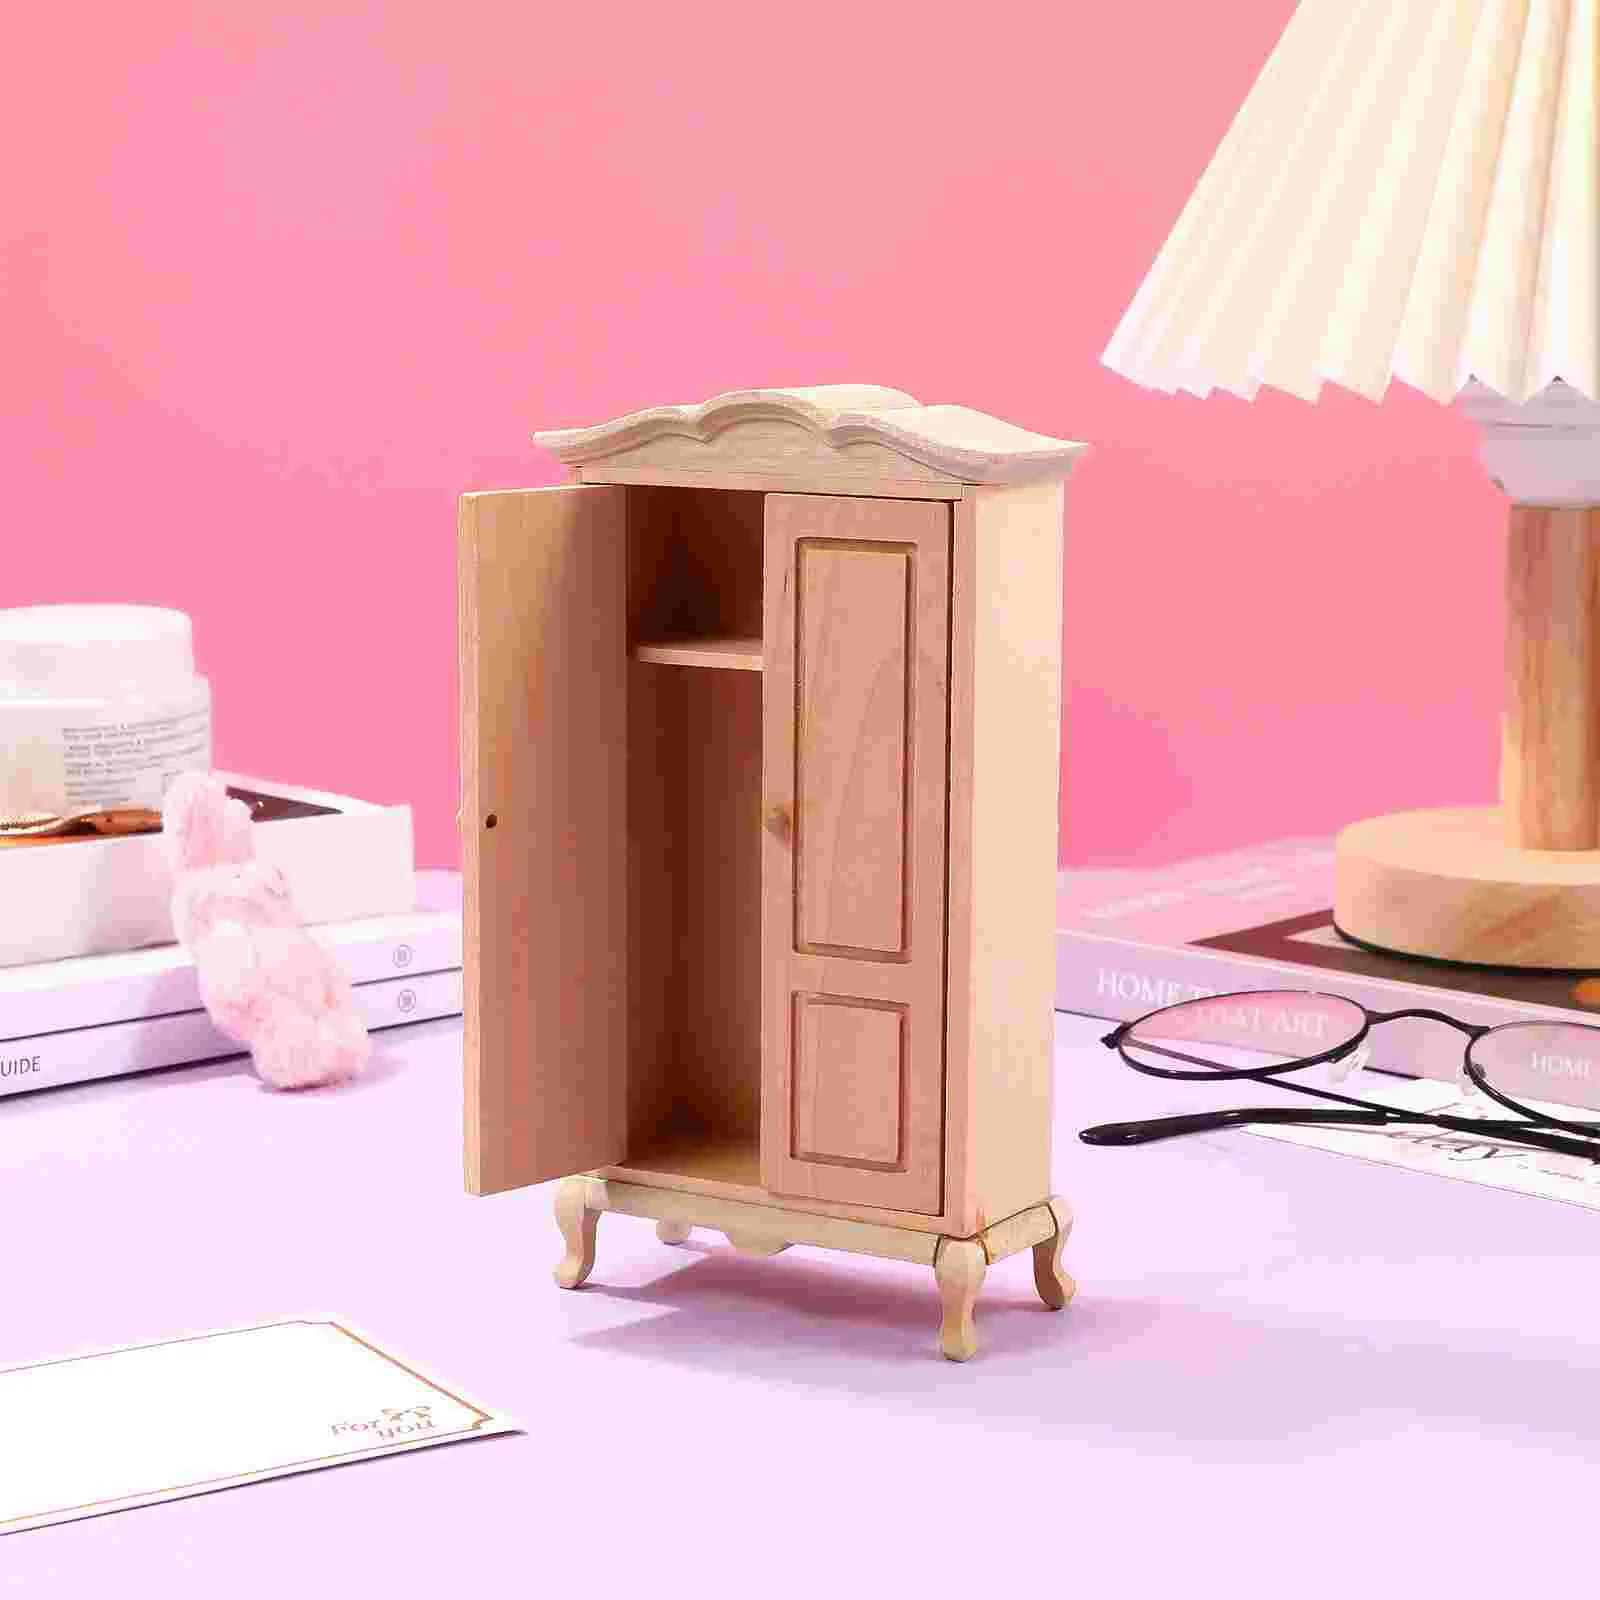 

Wardrobe Model Toy House Decor Accessories Furniture Cabinet Miniature Wooden 1: 12 Scale Decors